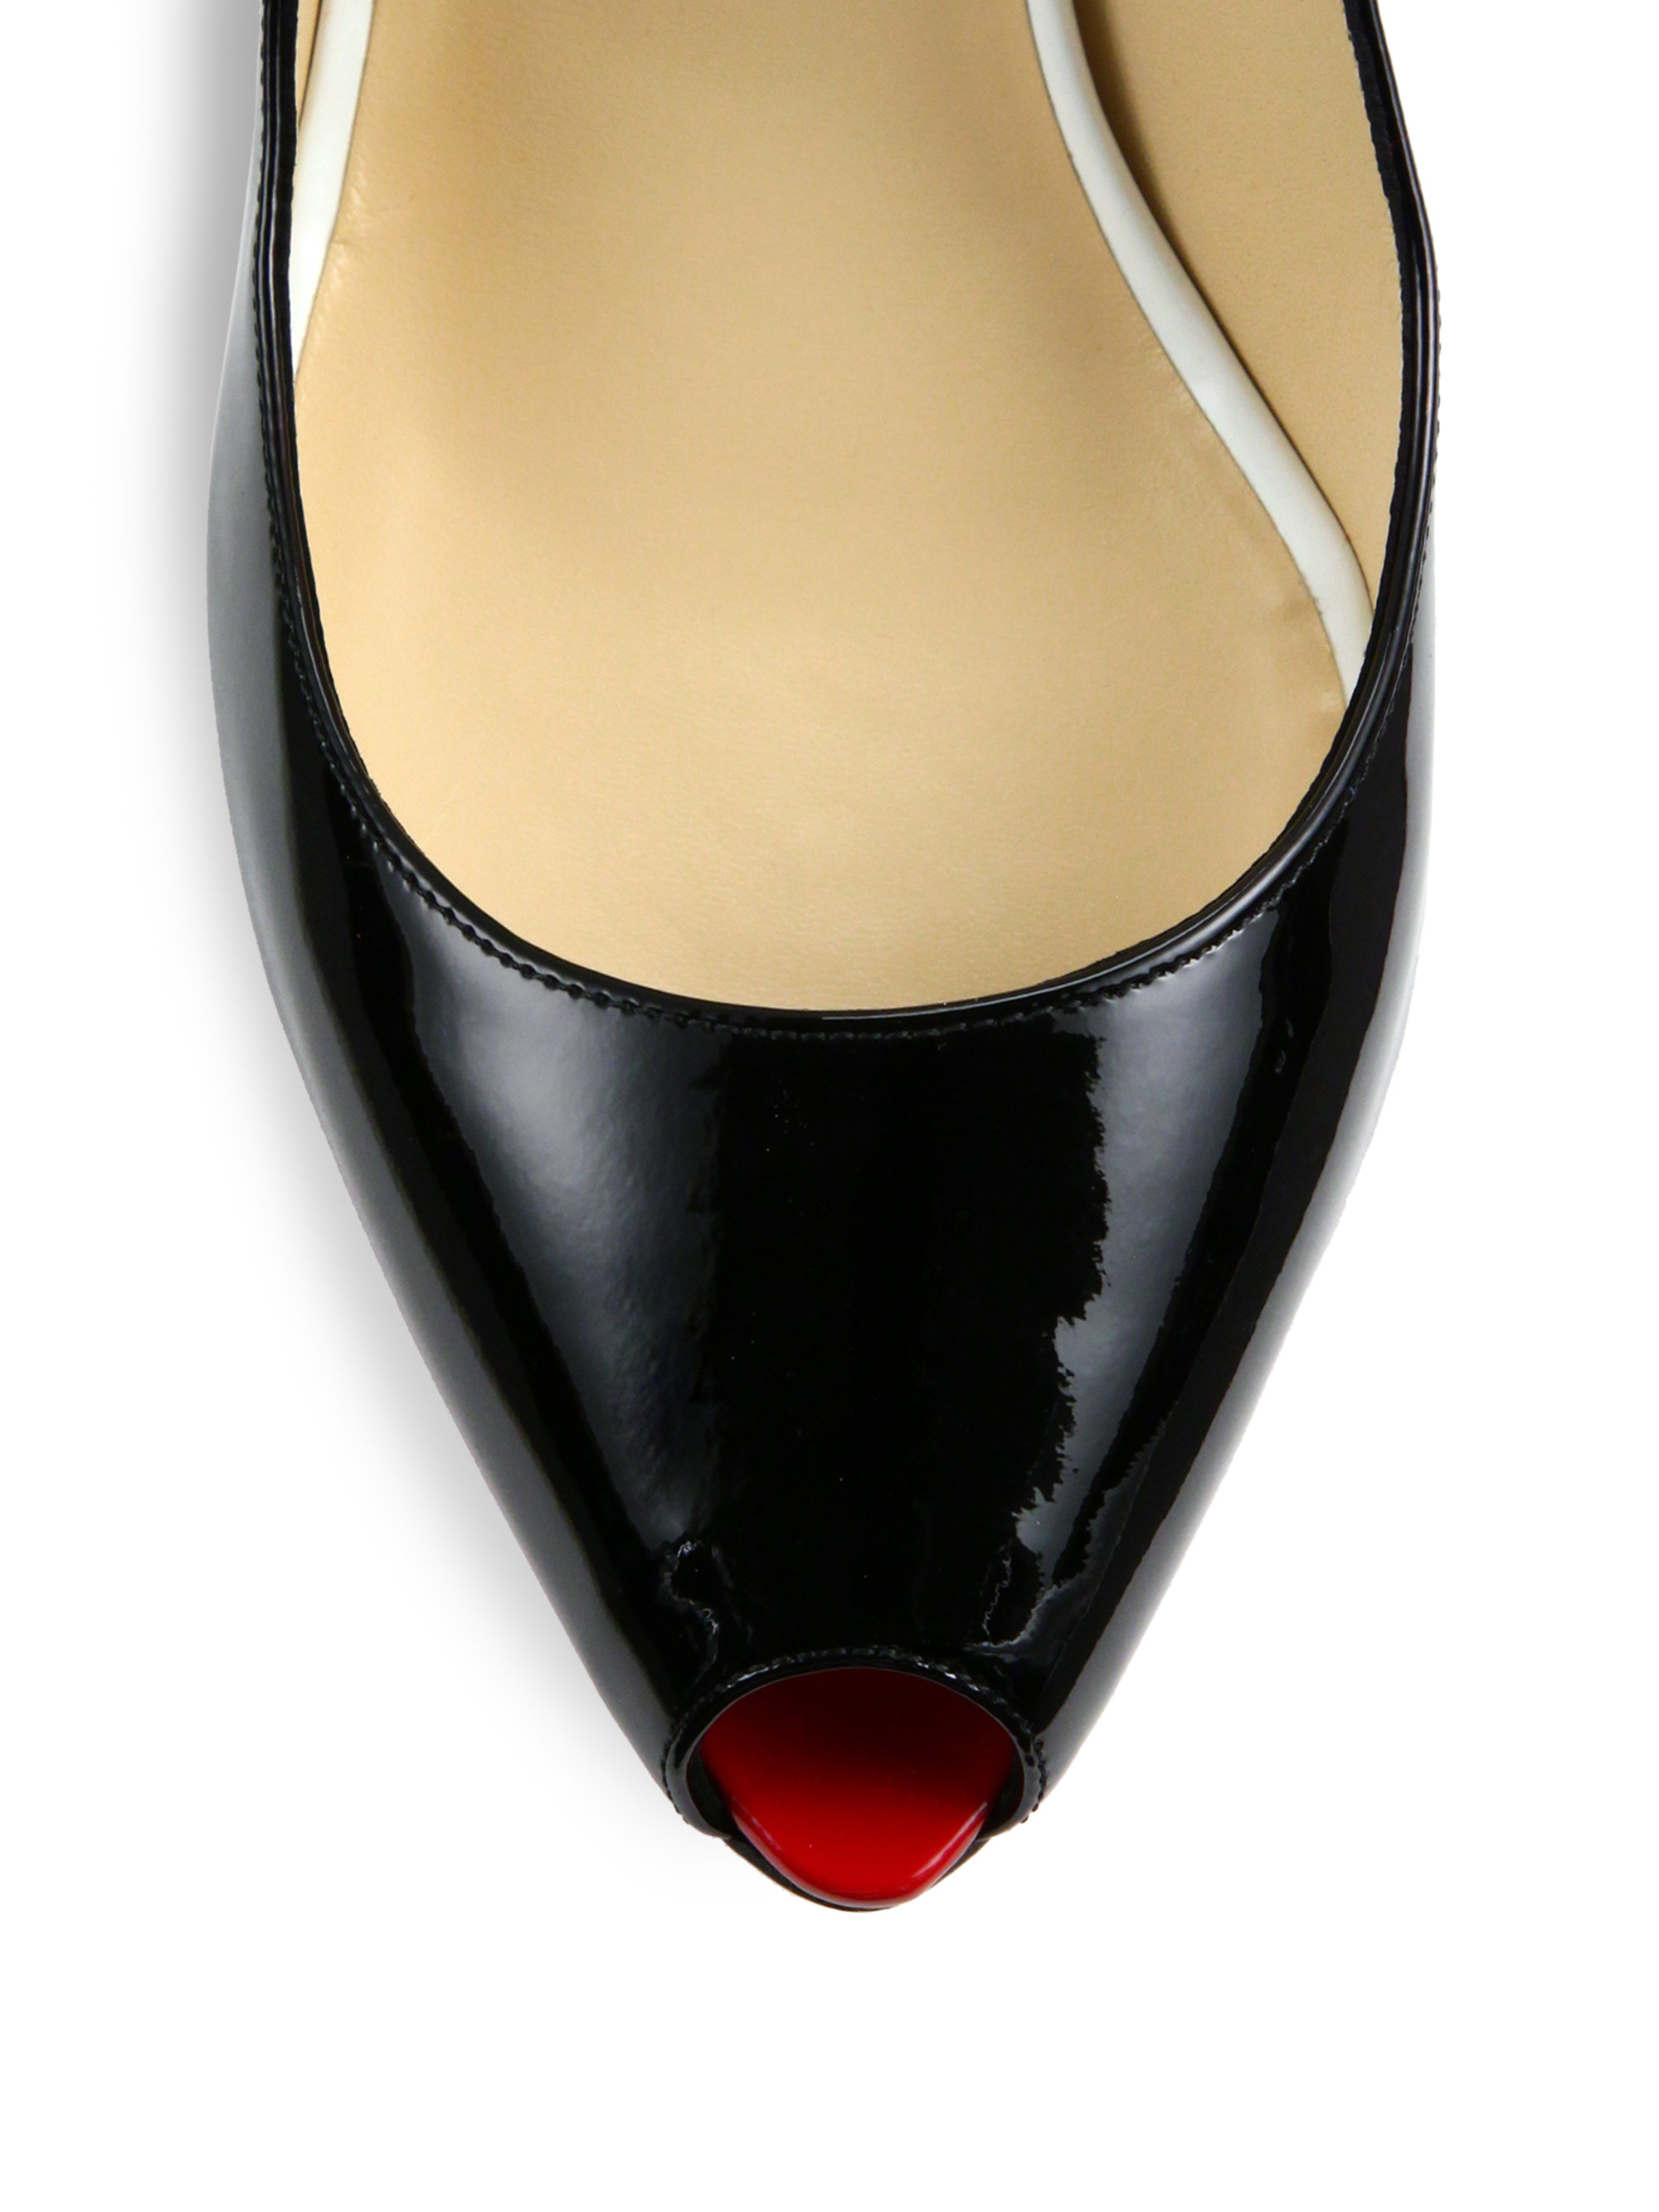 fake louis vuitton mens shoes - christian louboutin black court shoes in glazed leather